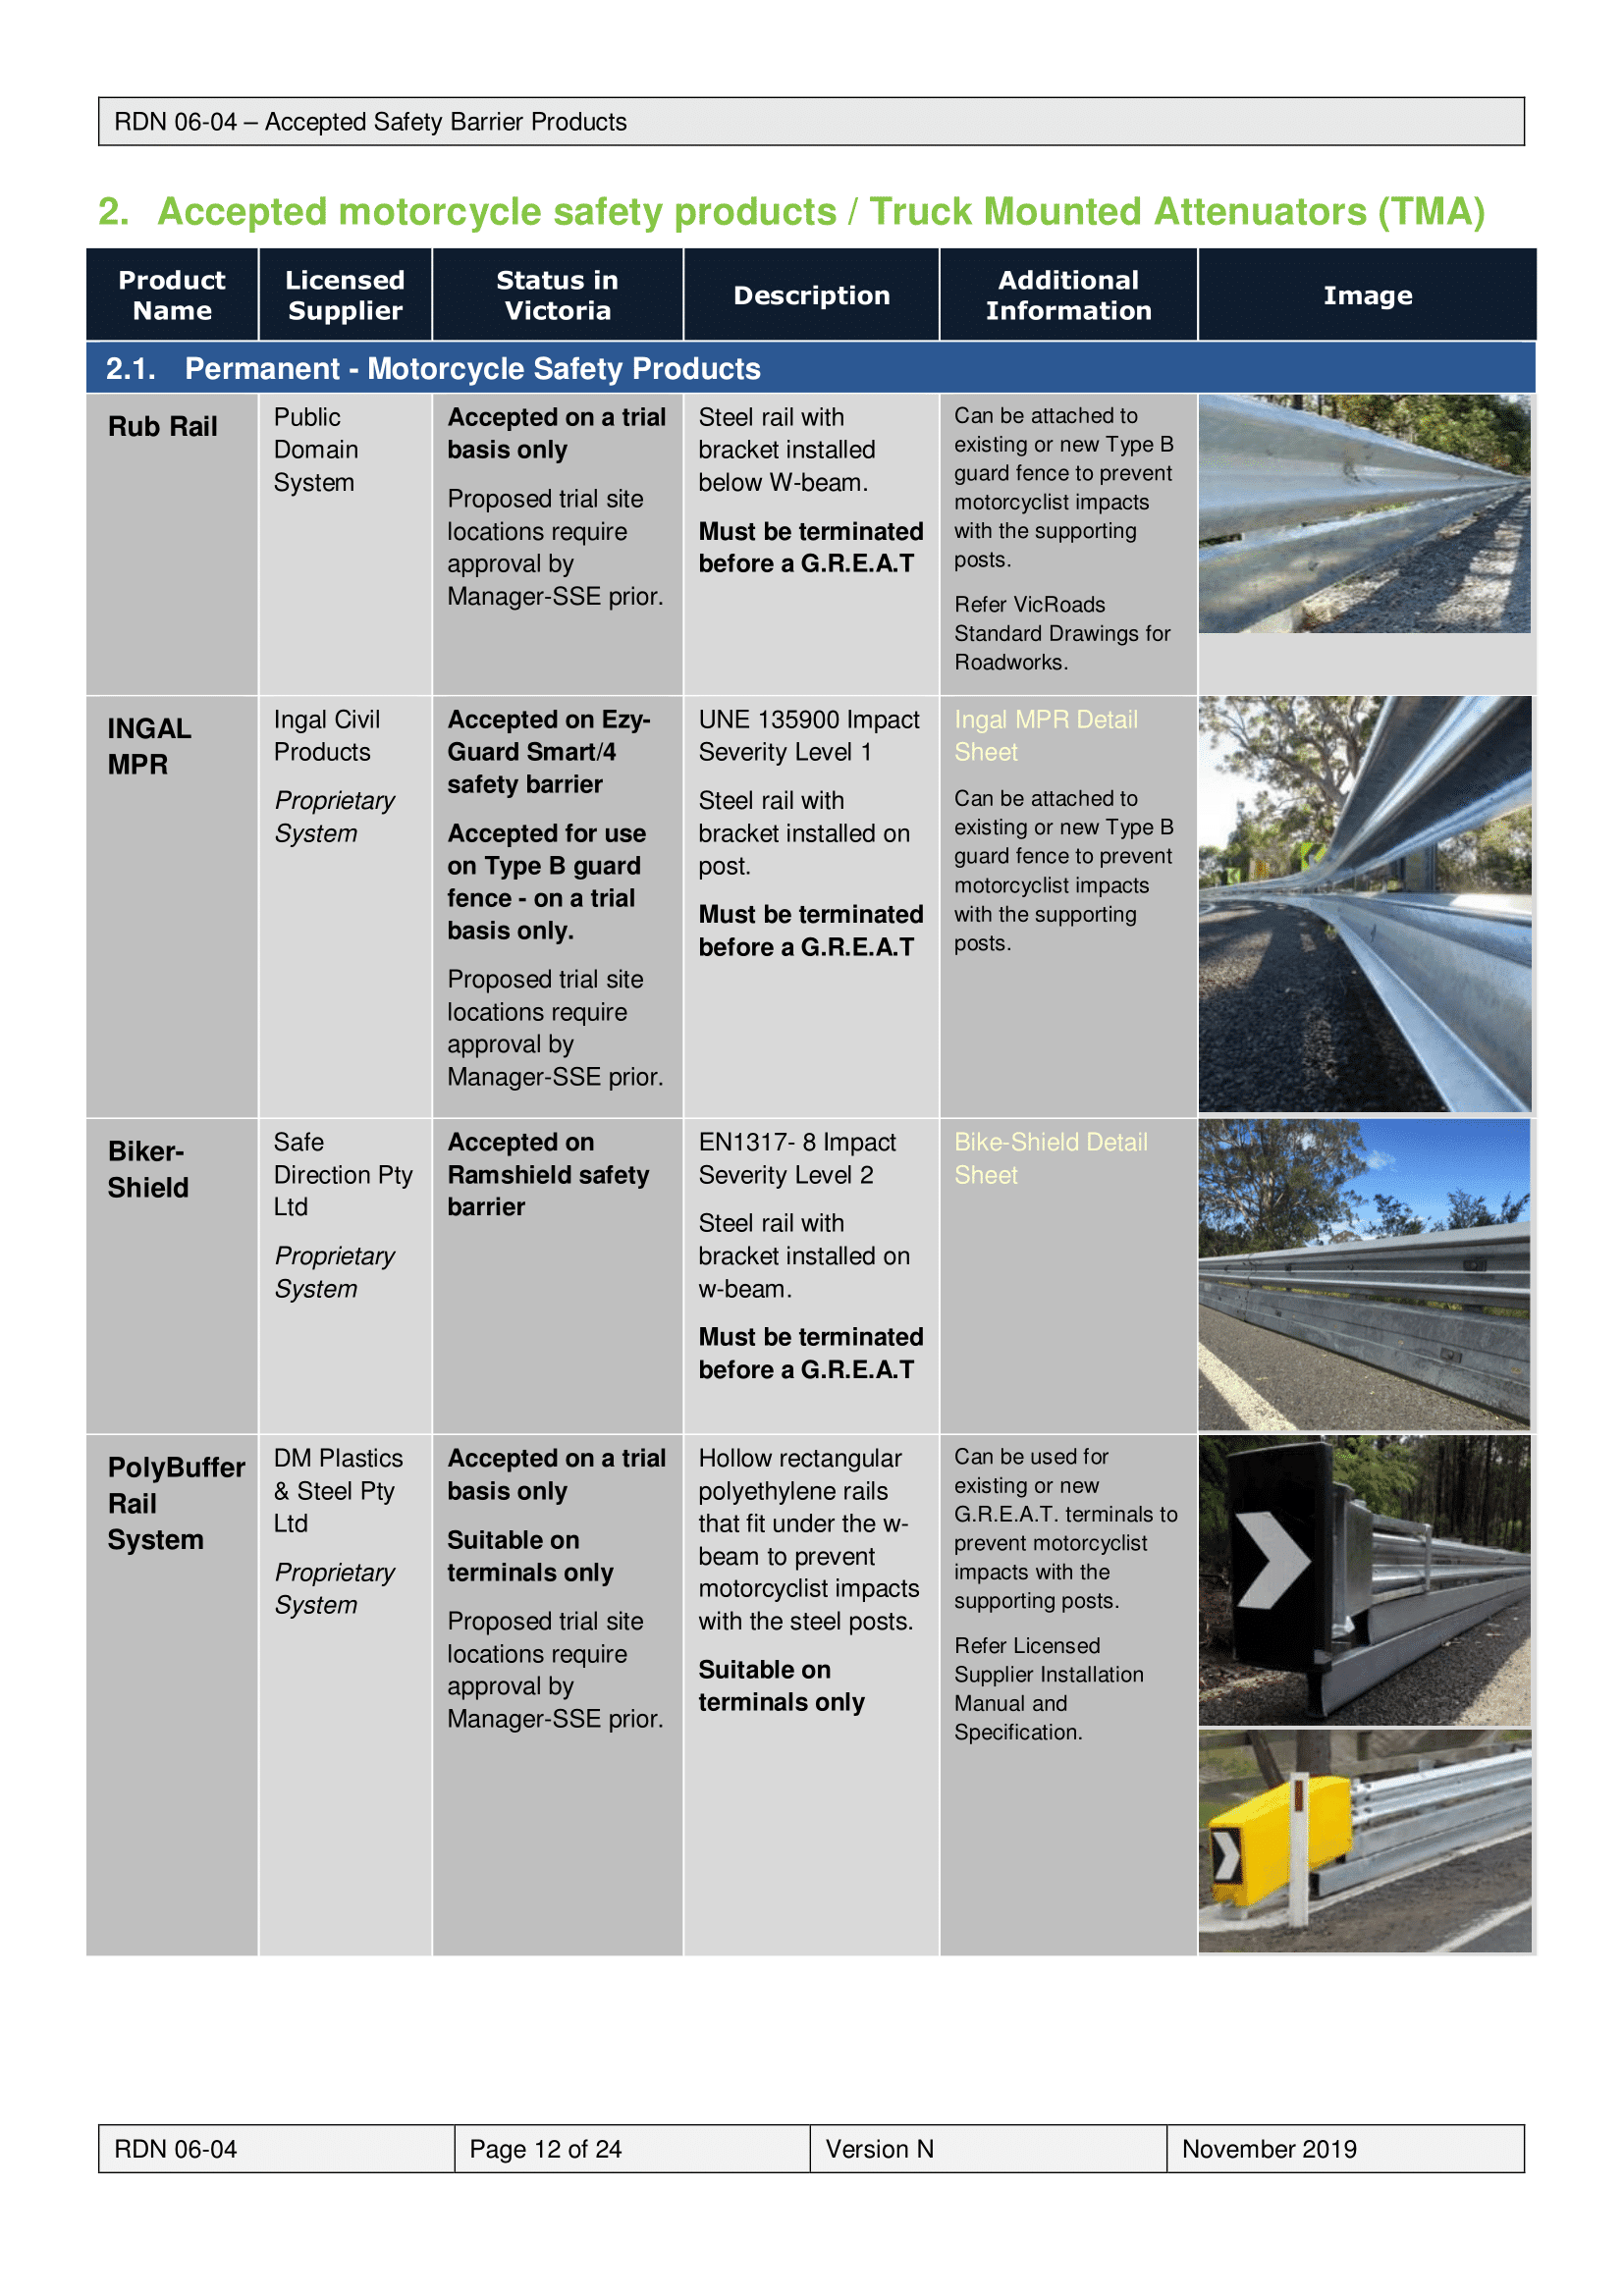 Road Design Note 0604 N Accepted Safety Barrier Products 11 2019-12